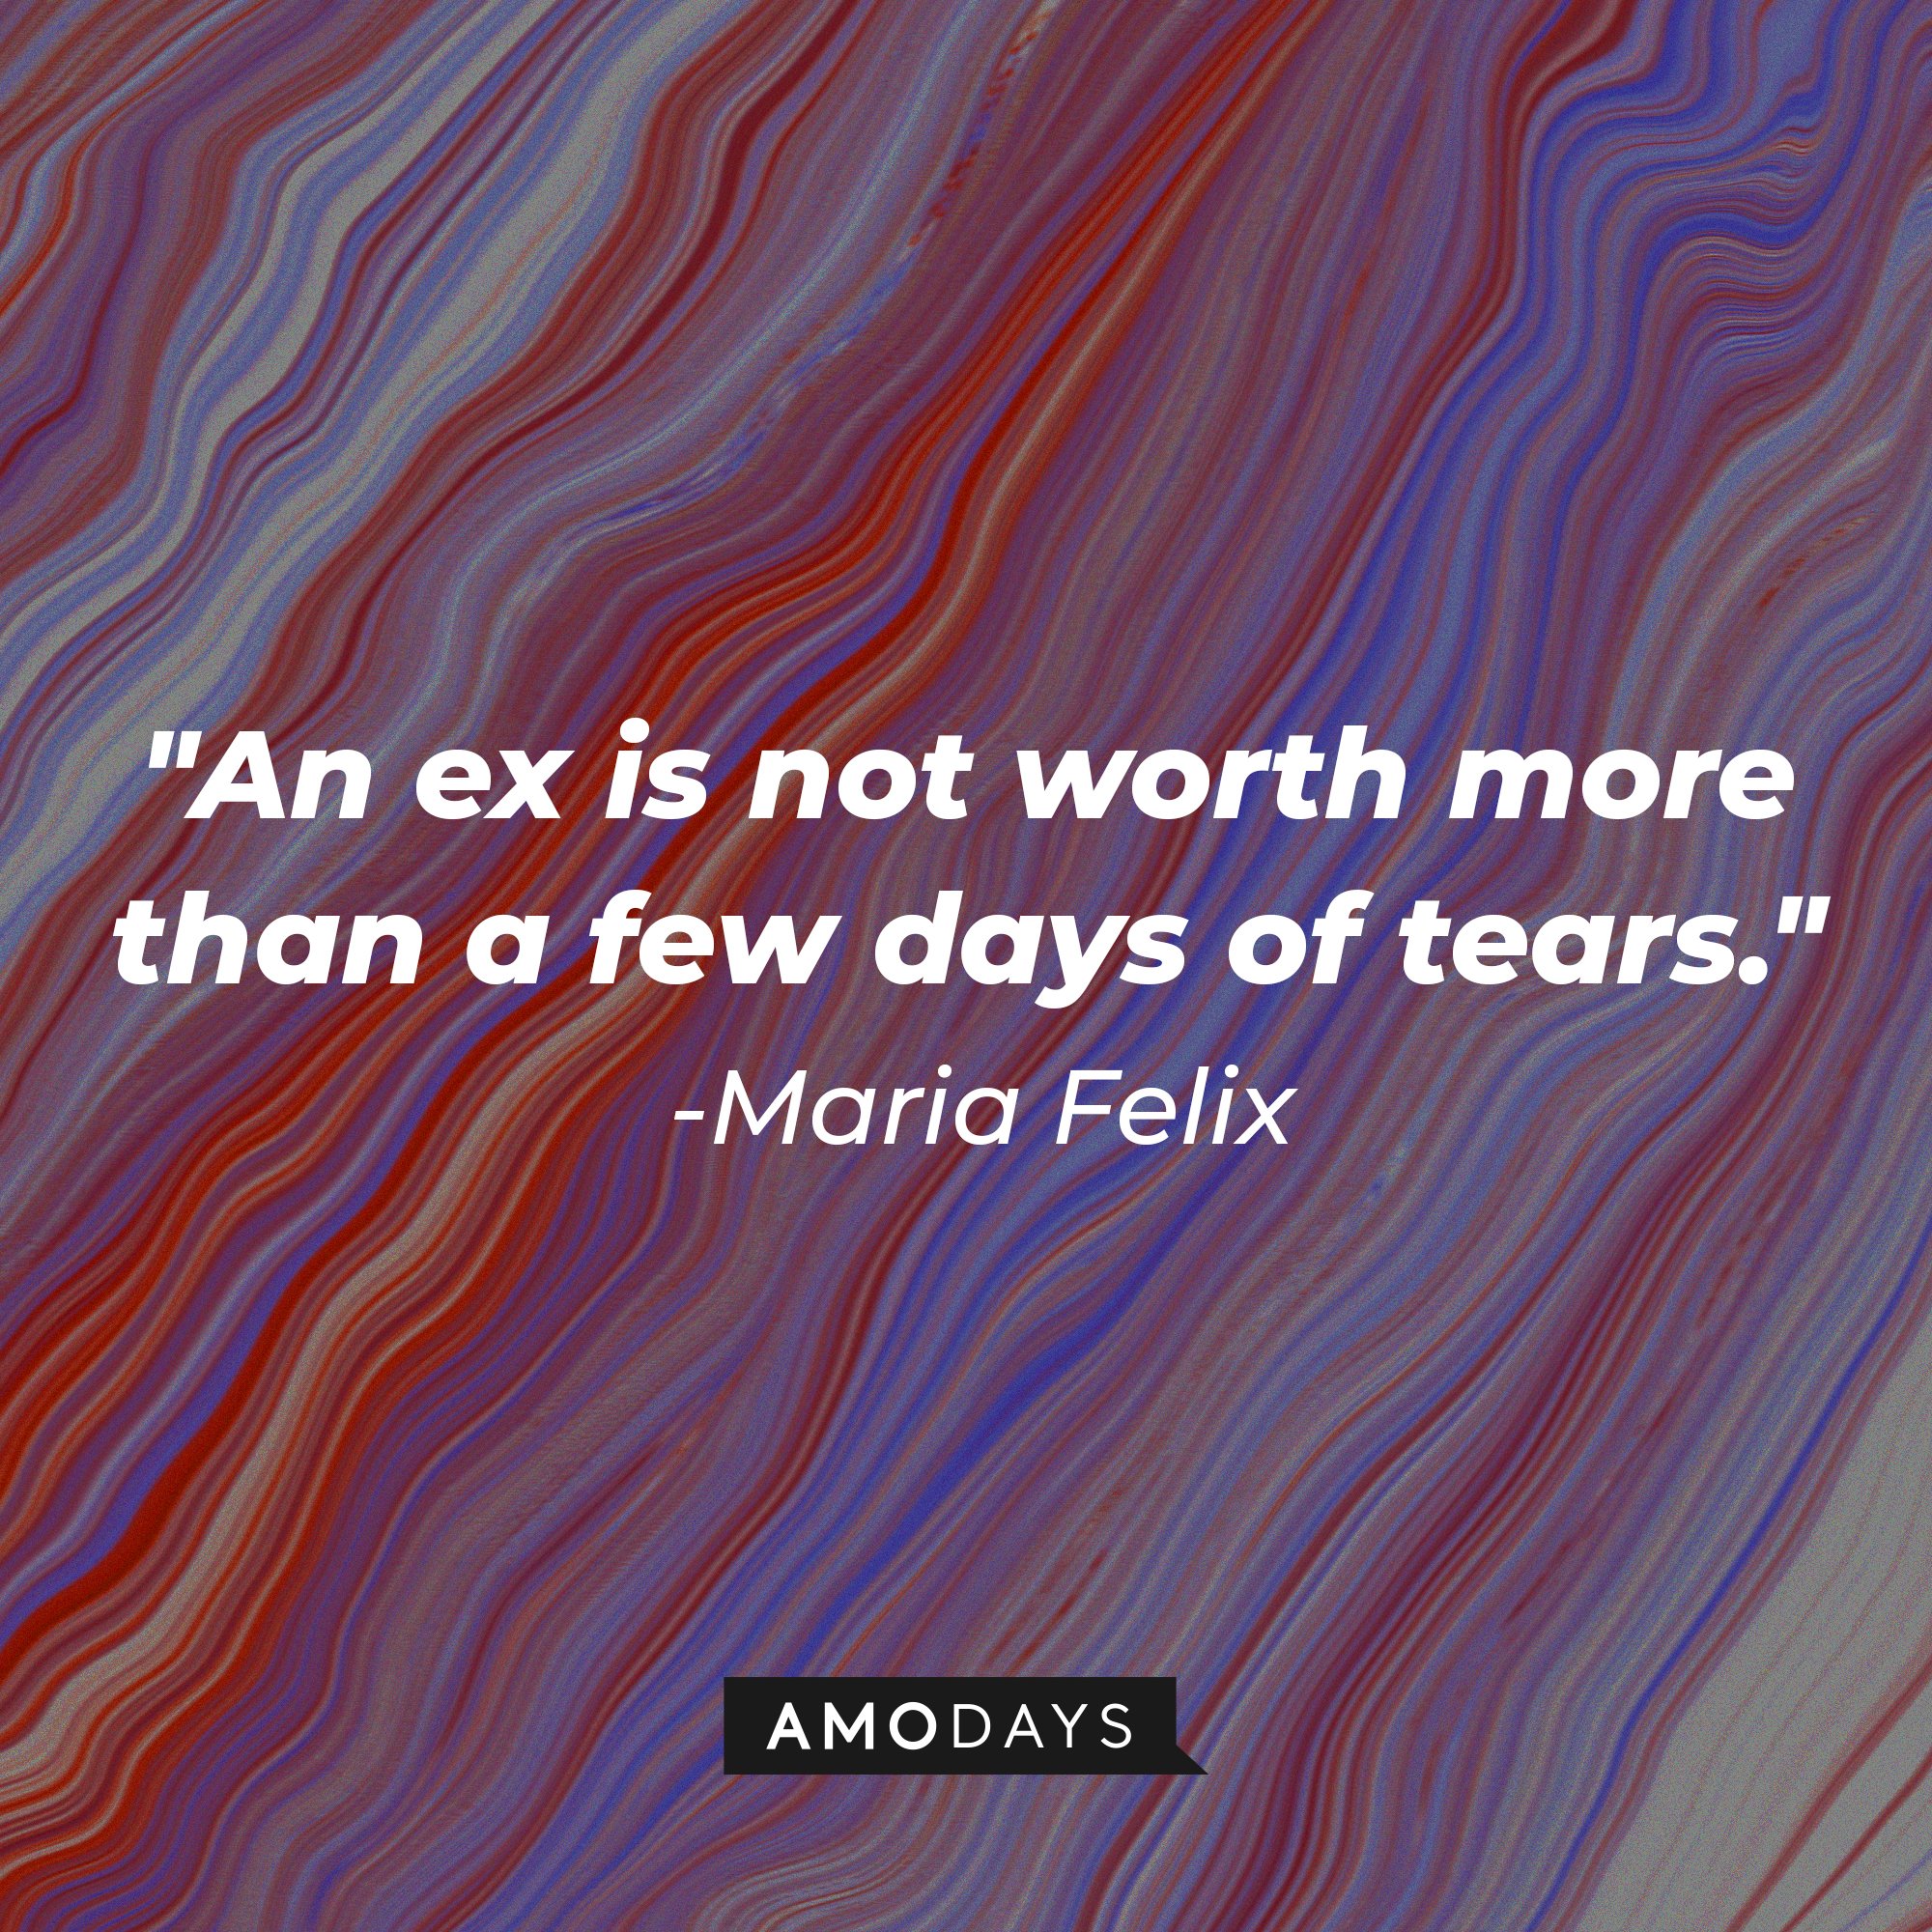 Maria Felix’s quote: "An ex is not worth more than a few days of tears." | Image: AmoDays